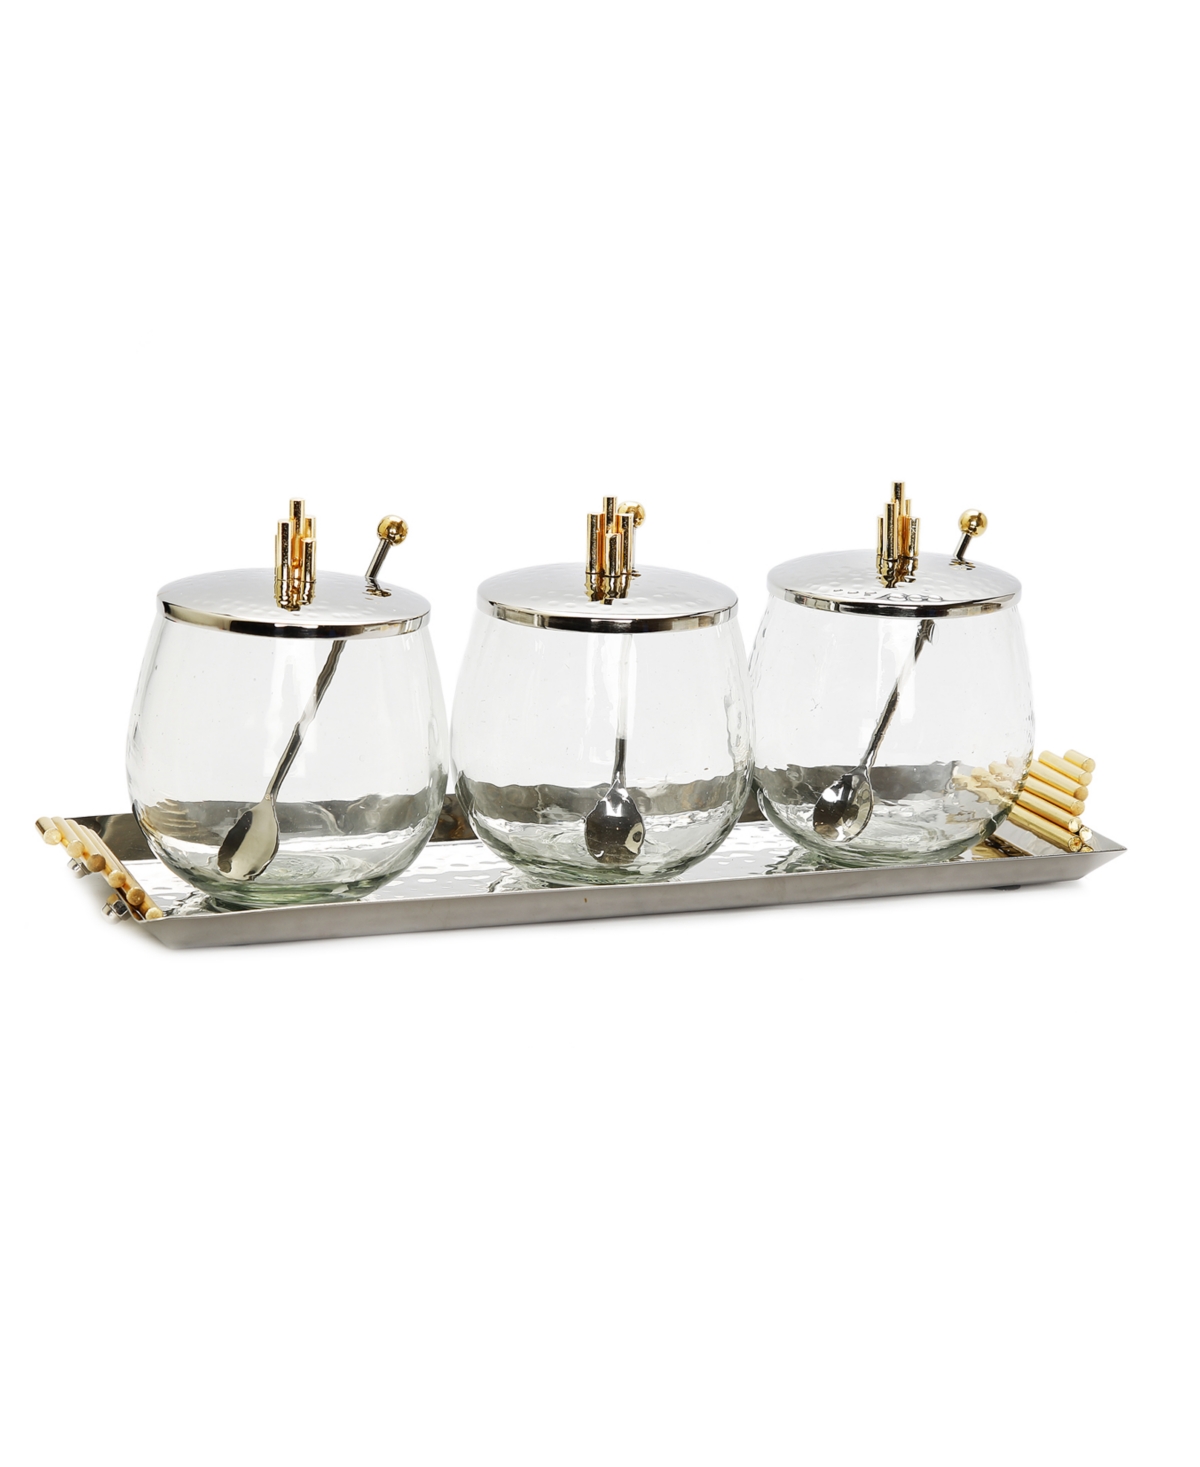 Classic Touch Hammered Tray With 3 Glass Bowls Symmetrical Design, Set Of 10 In Gold